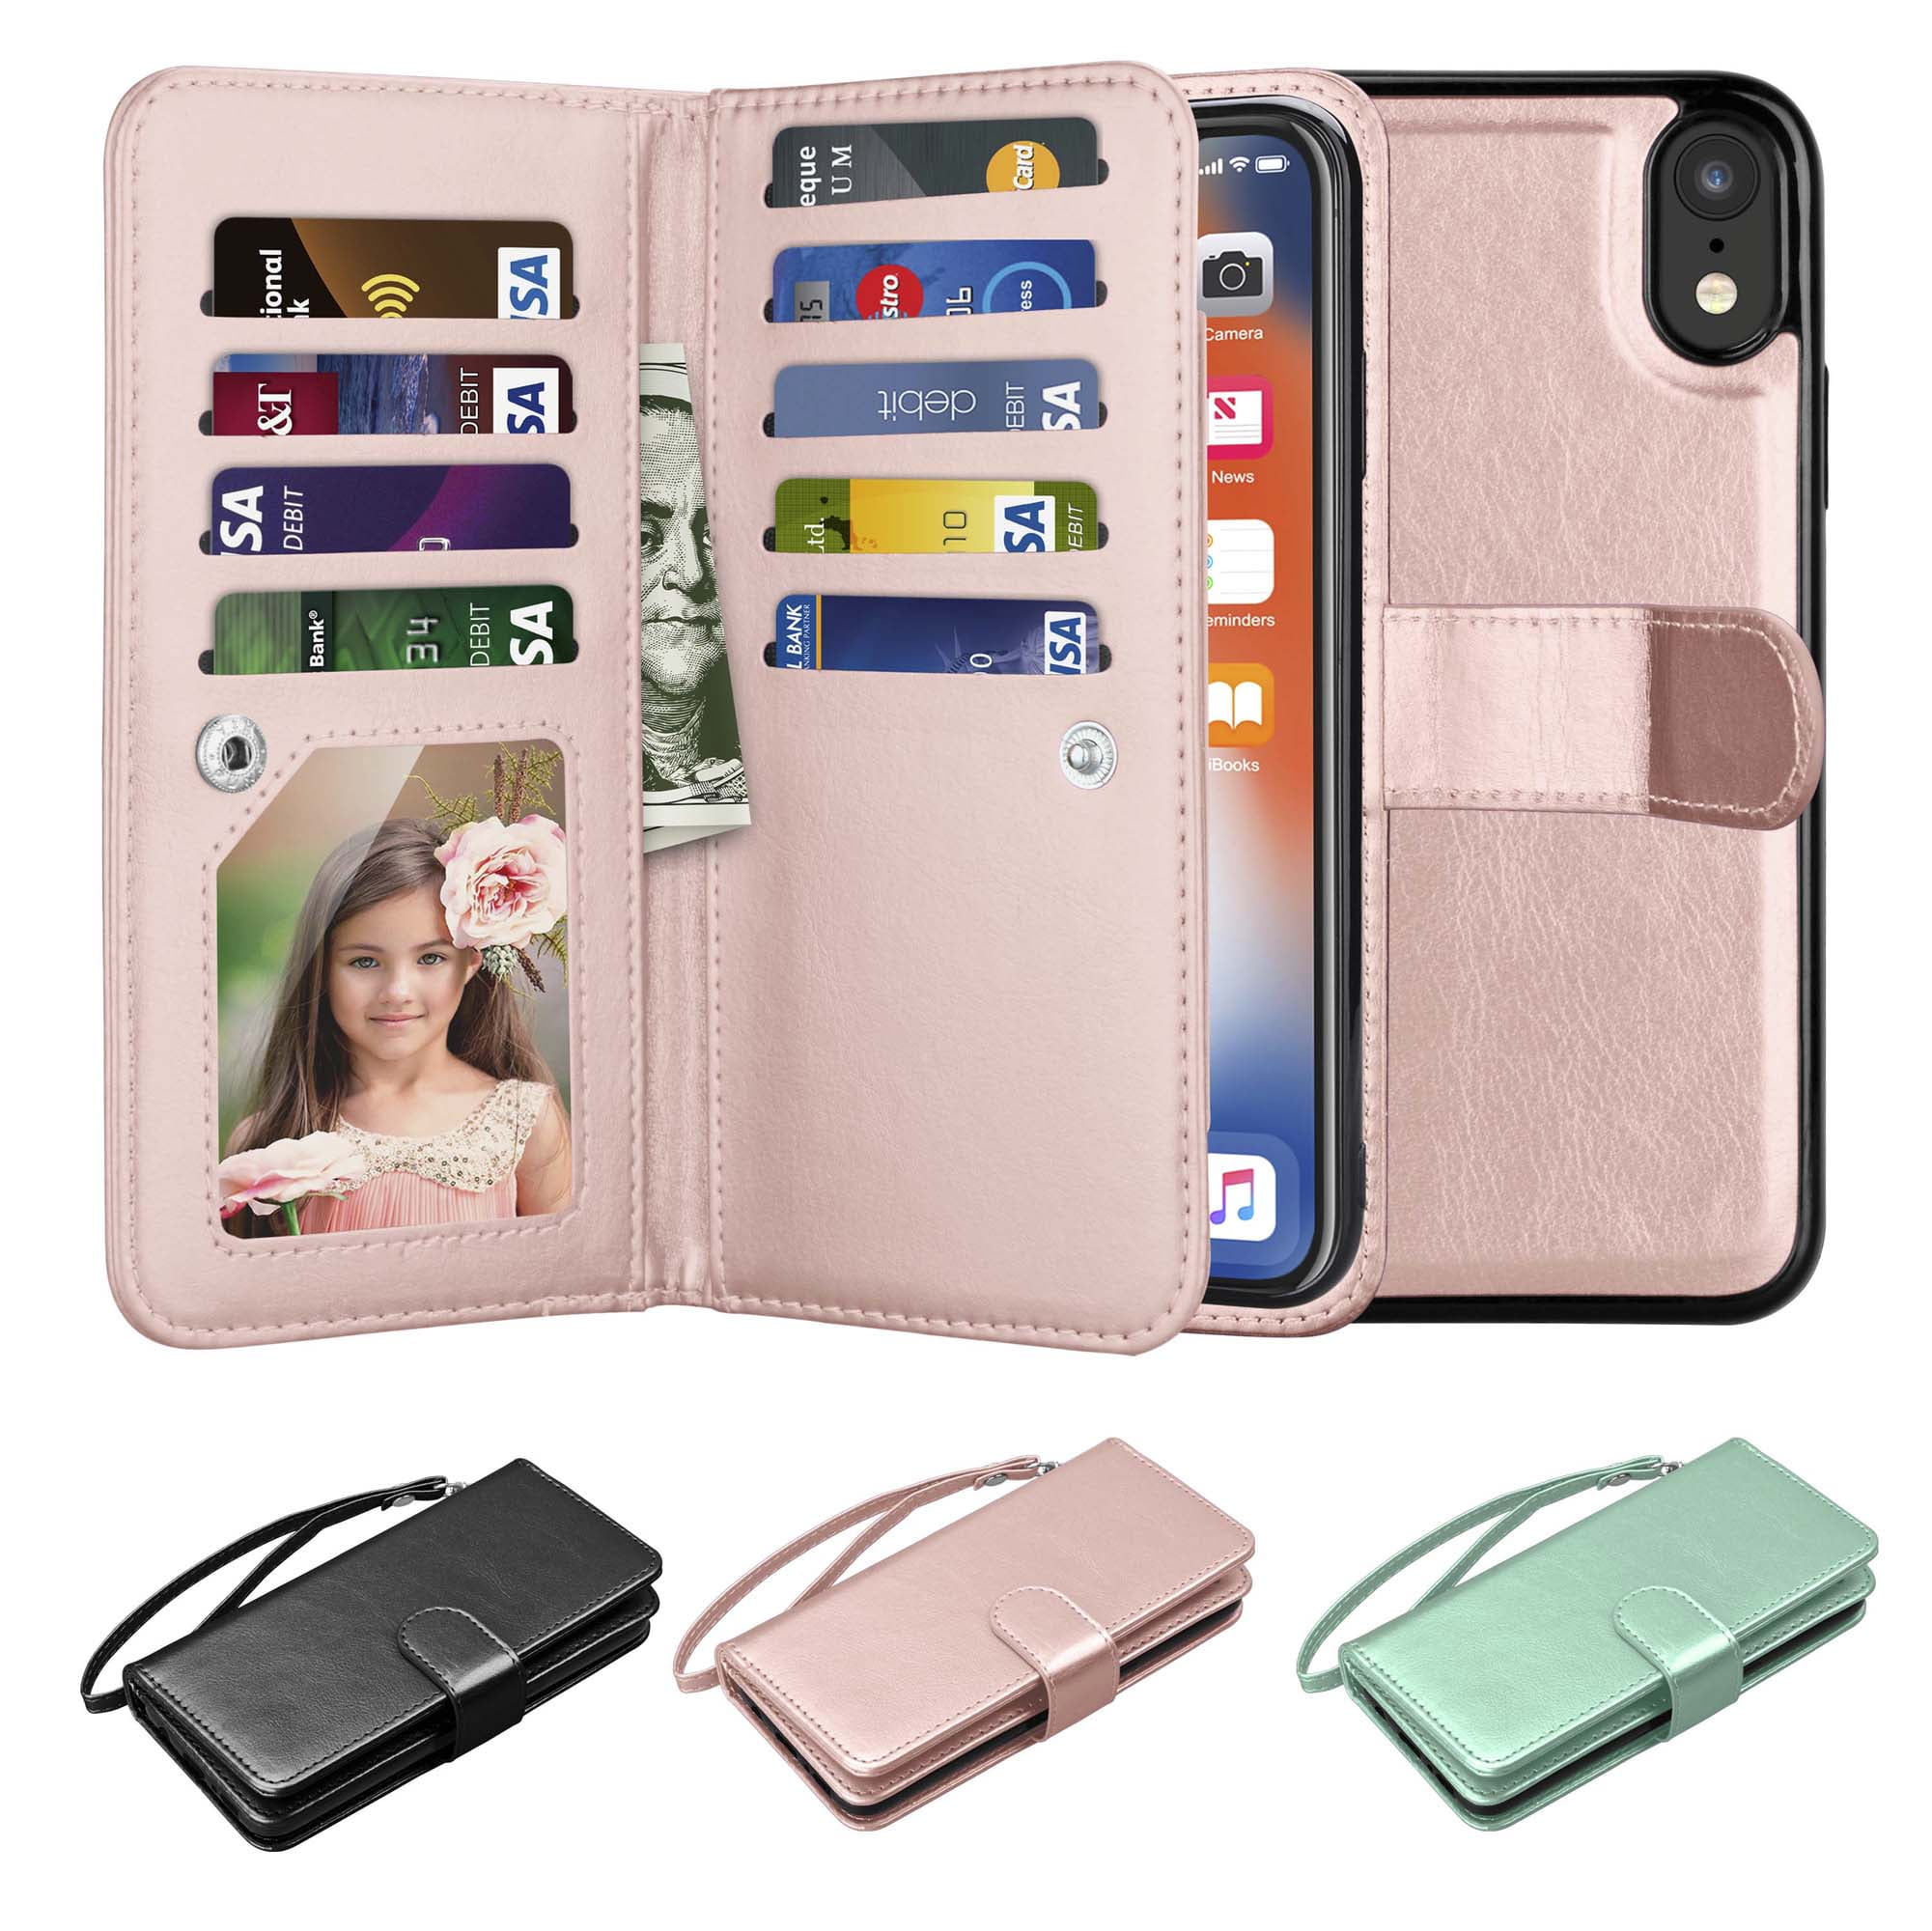 Case for iPhone XR Flip Case Slim PU Leather Wallet Case Rose Embossing Shockproof Folding Stand Cover with Credit Card Holder for iPhone XR,Green Magnetic closure